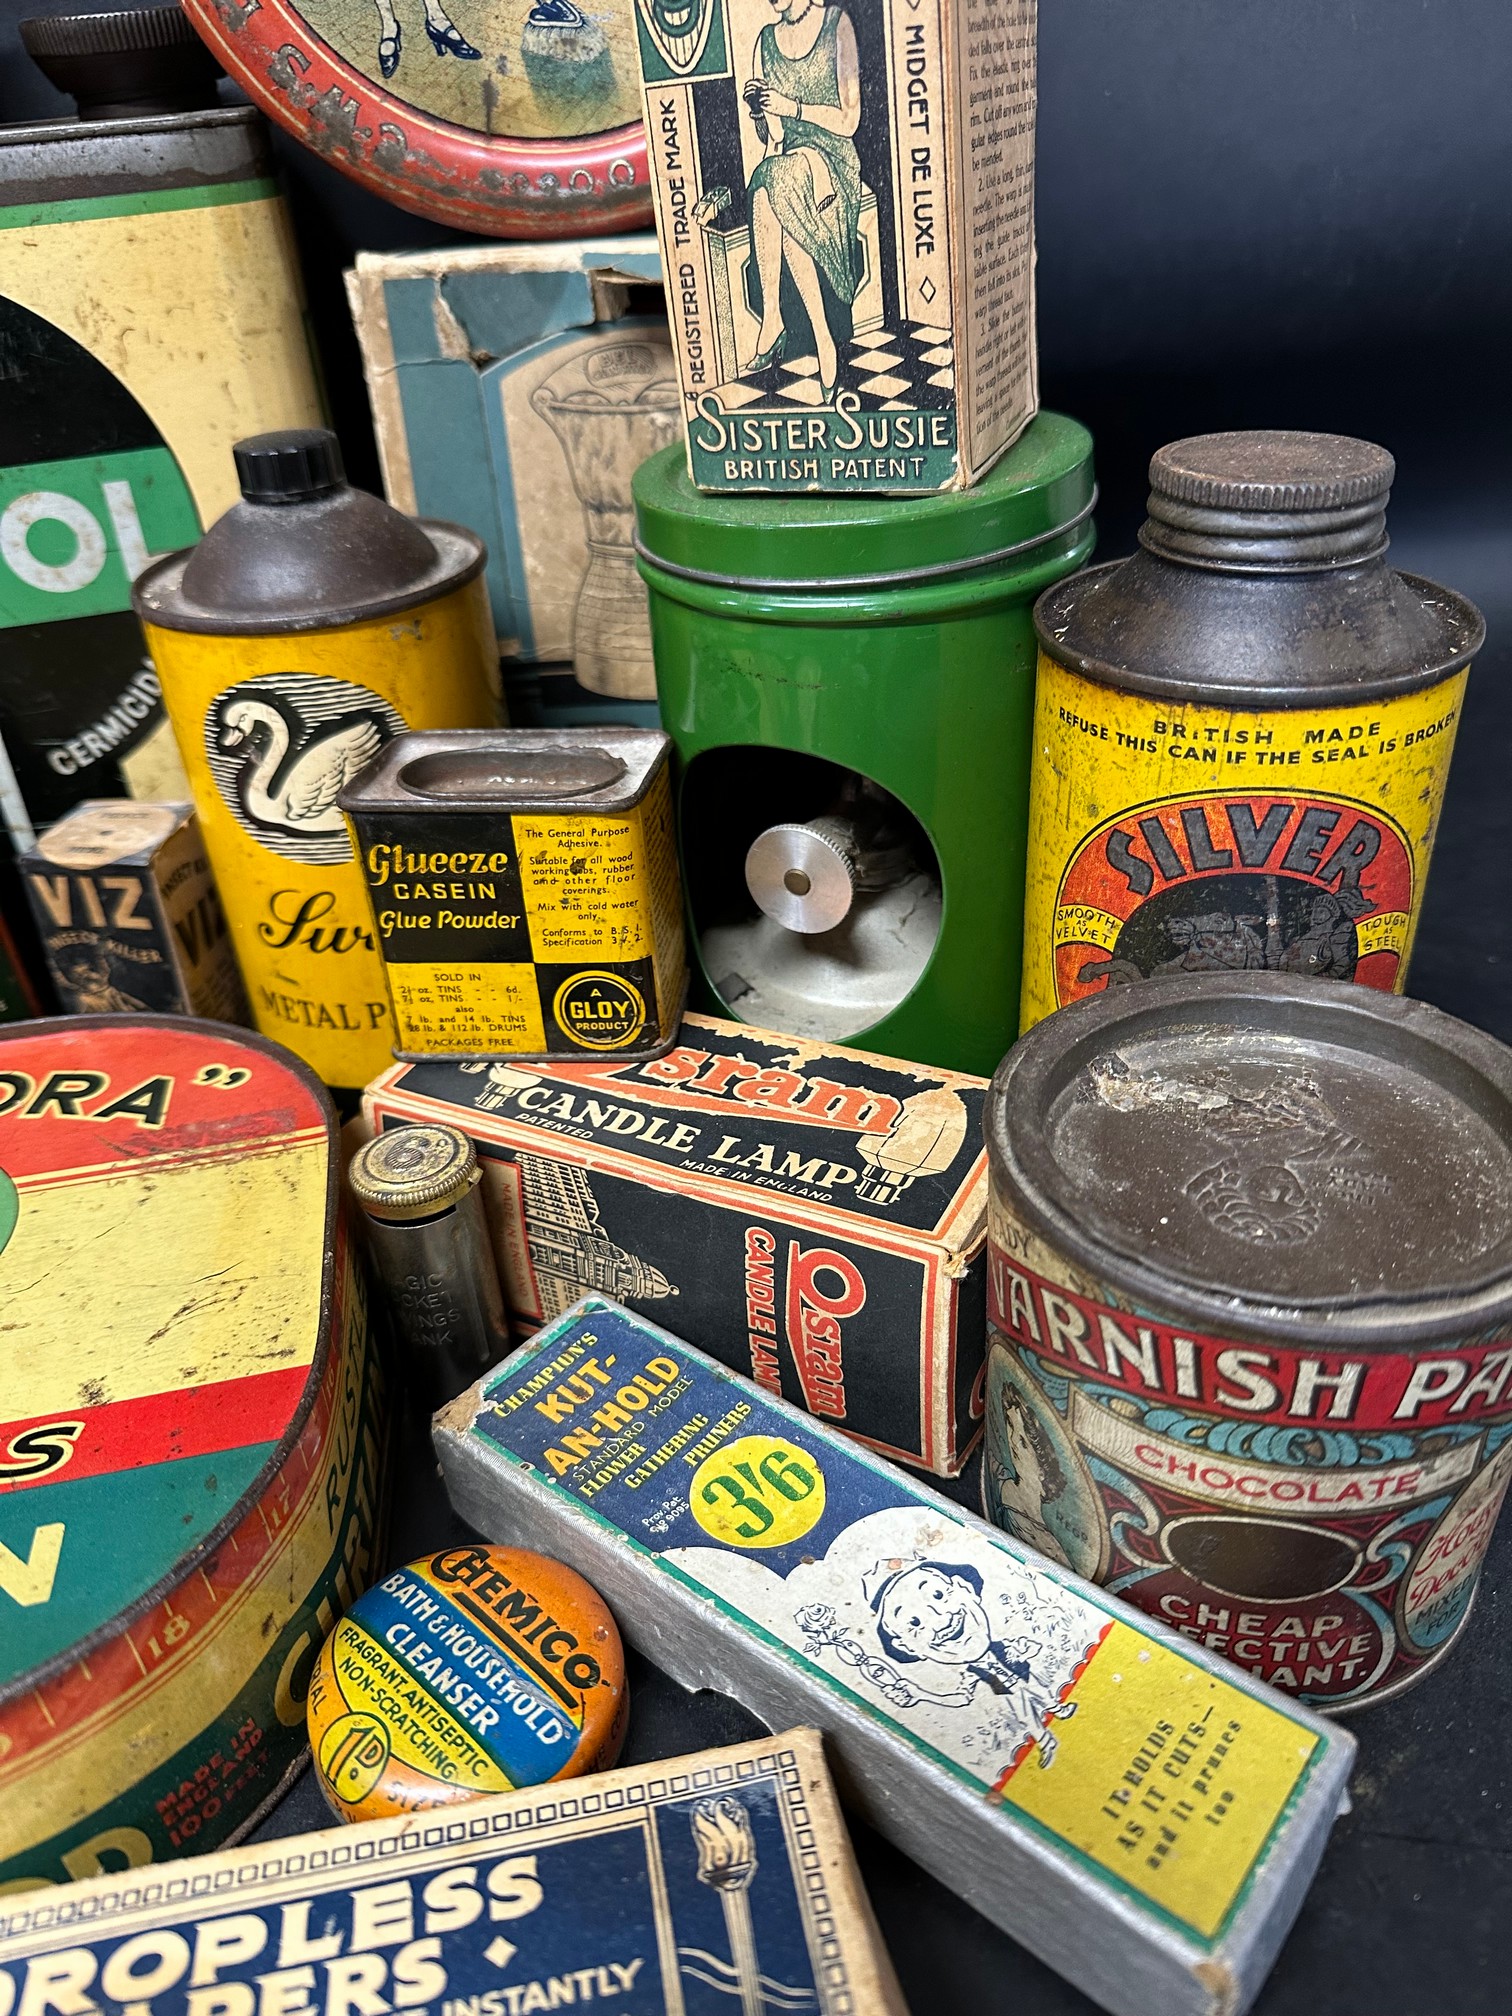 A large box of household products inc. Swan and other metal polishes, mops, Ever Ready torch, - Image 2 of 11